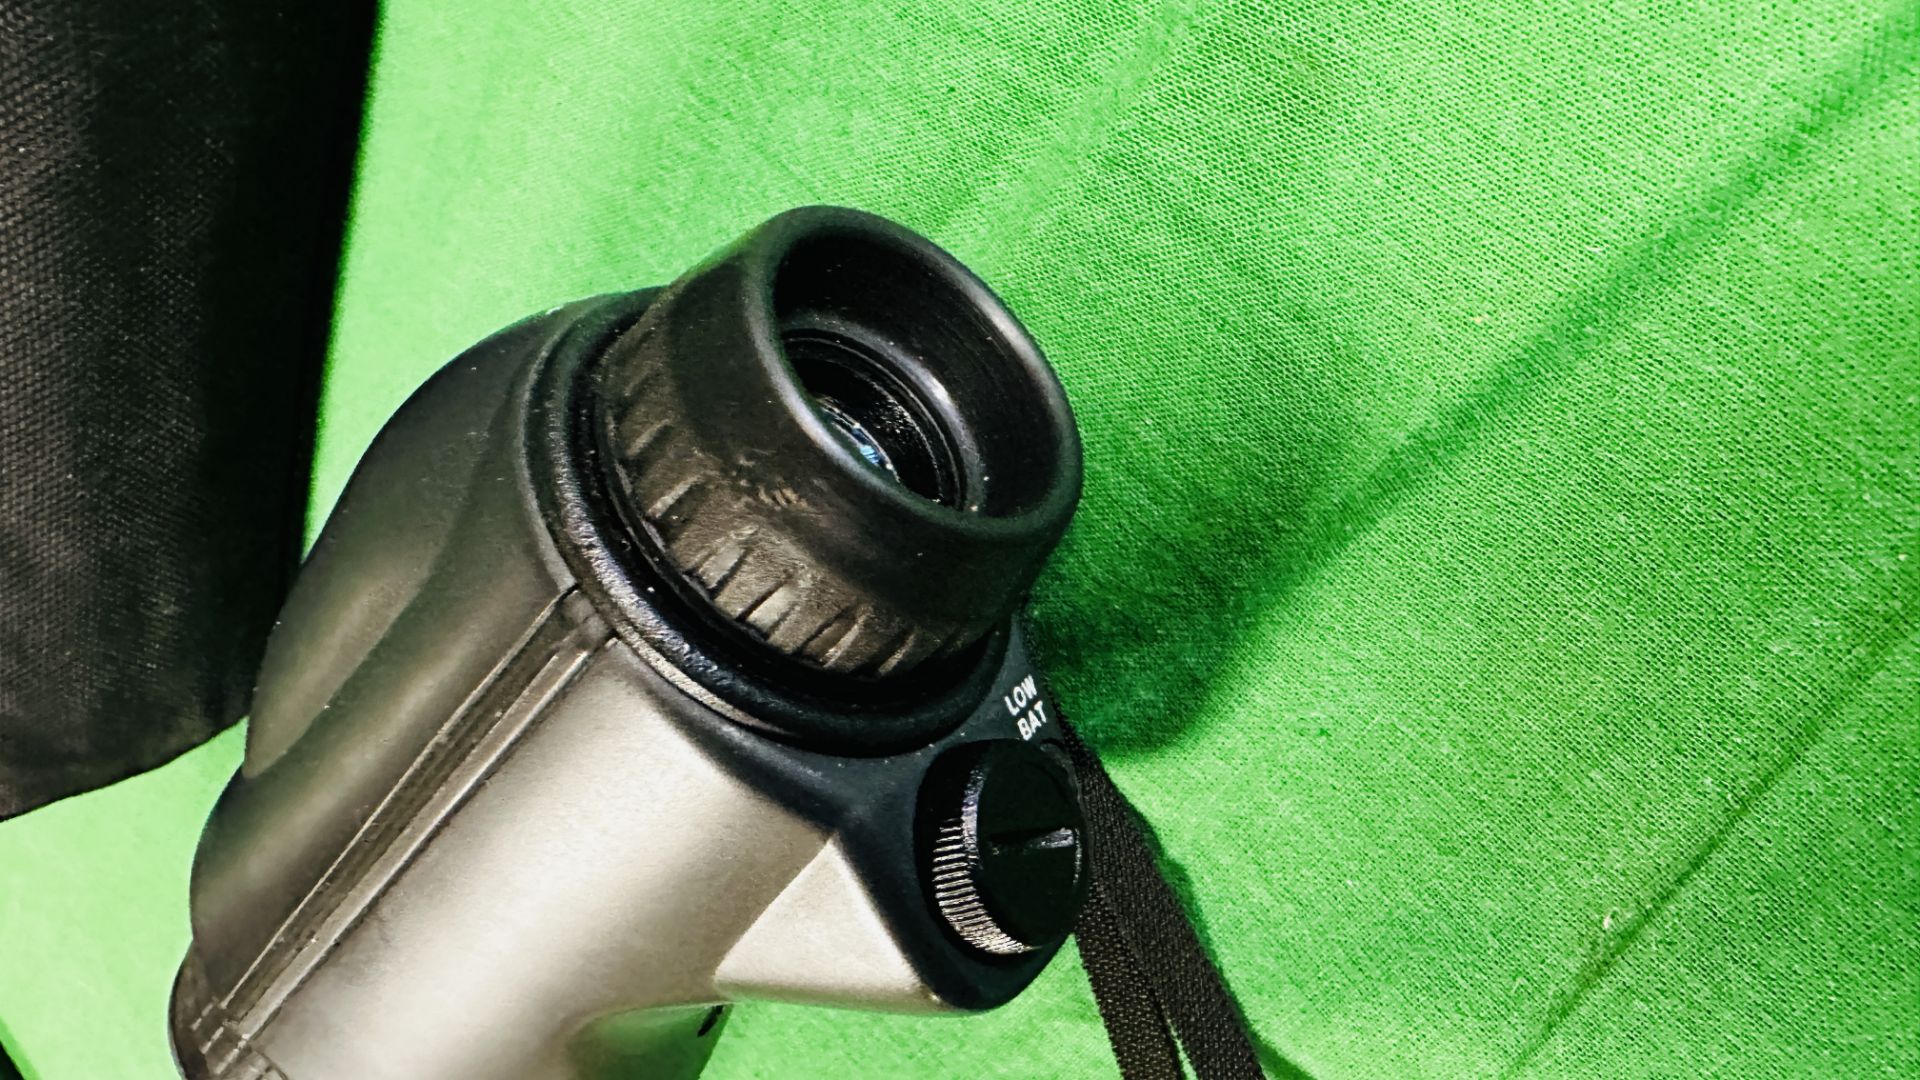 A NEWCON NIGHT VISION SCOPE IN CASE. - Image 4 of 5